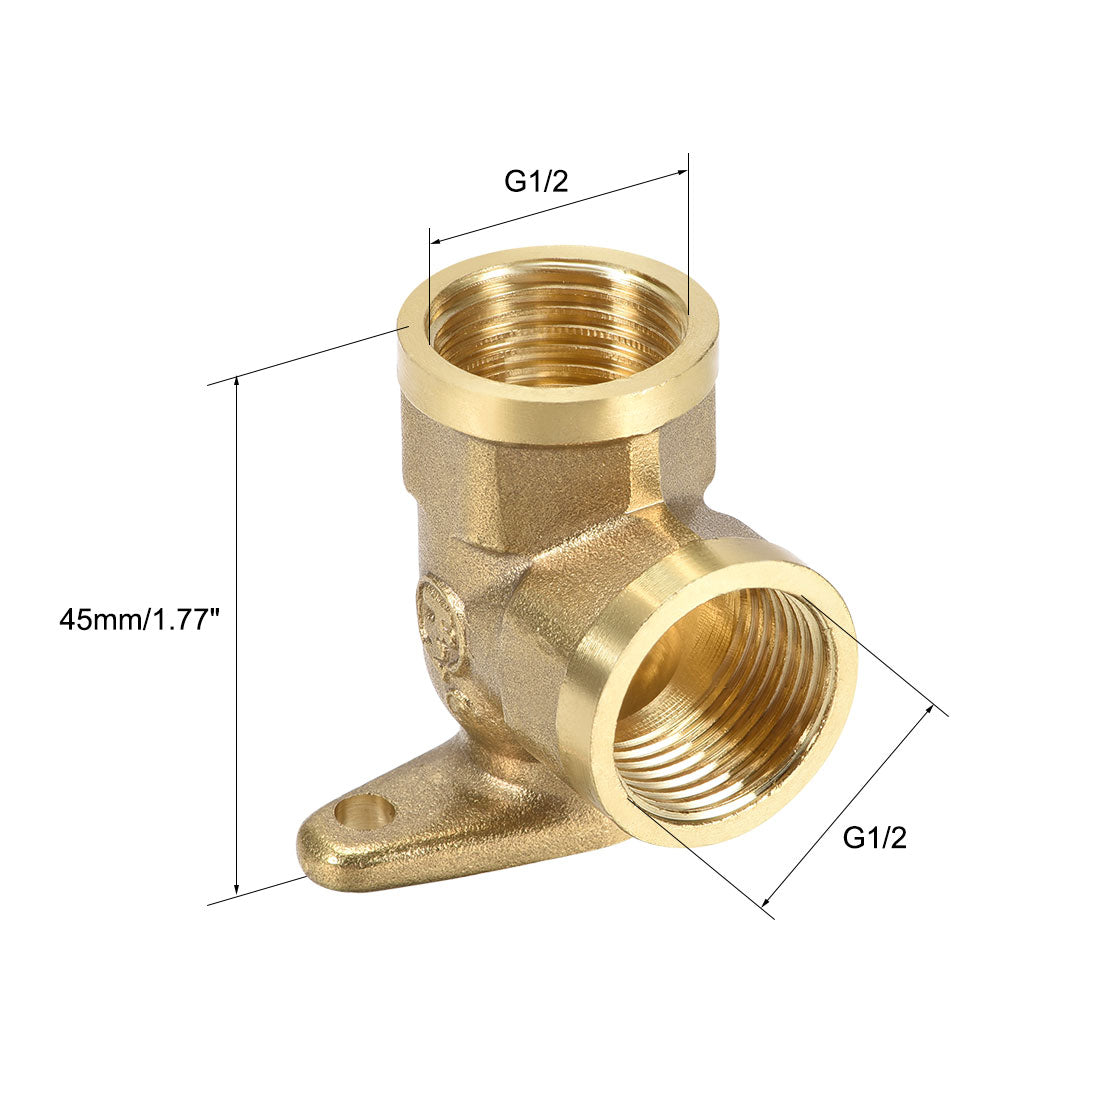 uxcell Uxcell Brass Pipe Fitting 90 Degree Drop Ear Elbow G1/2 Female x G1/2 Female Crimp Fitting